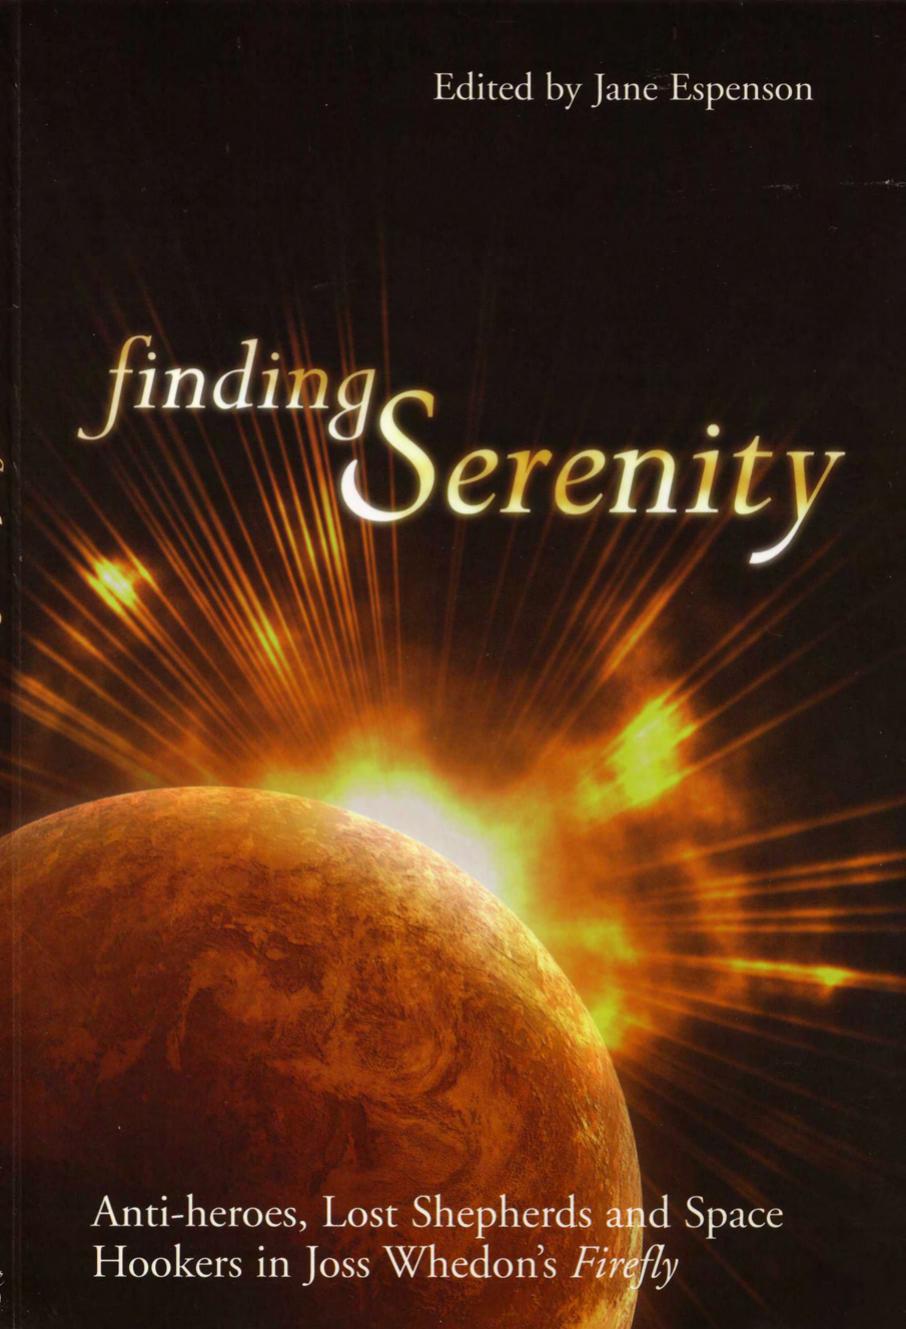 Finding Serenity: Anti-Heroes, Lost Shepherds and Space Hookers in Joss Whedon's Firefly (Smart Pop Series)